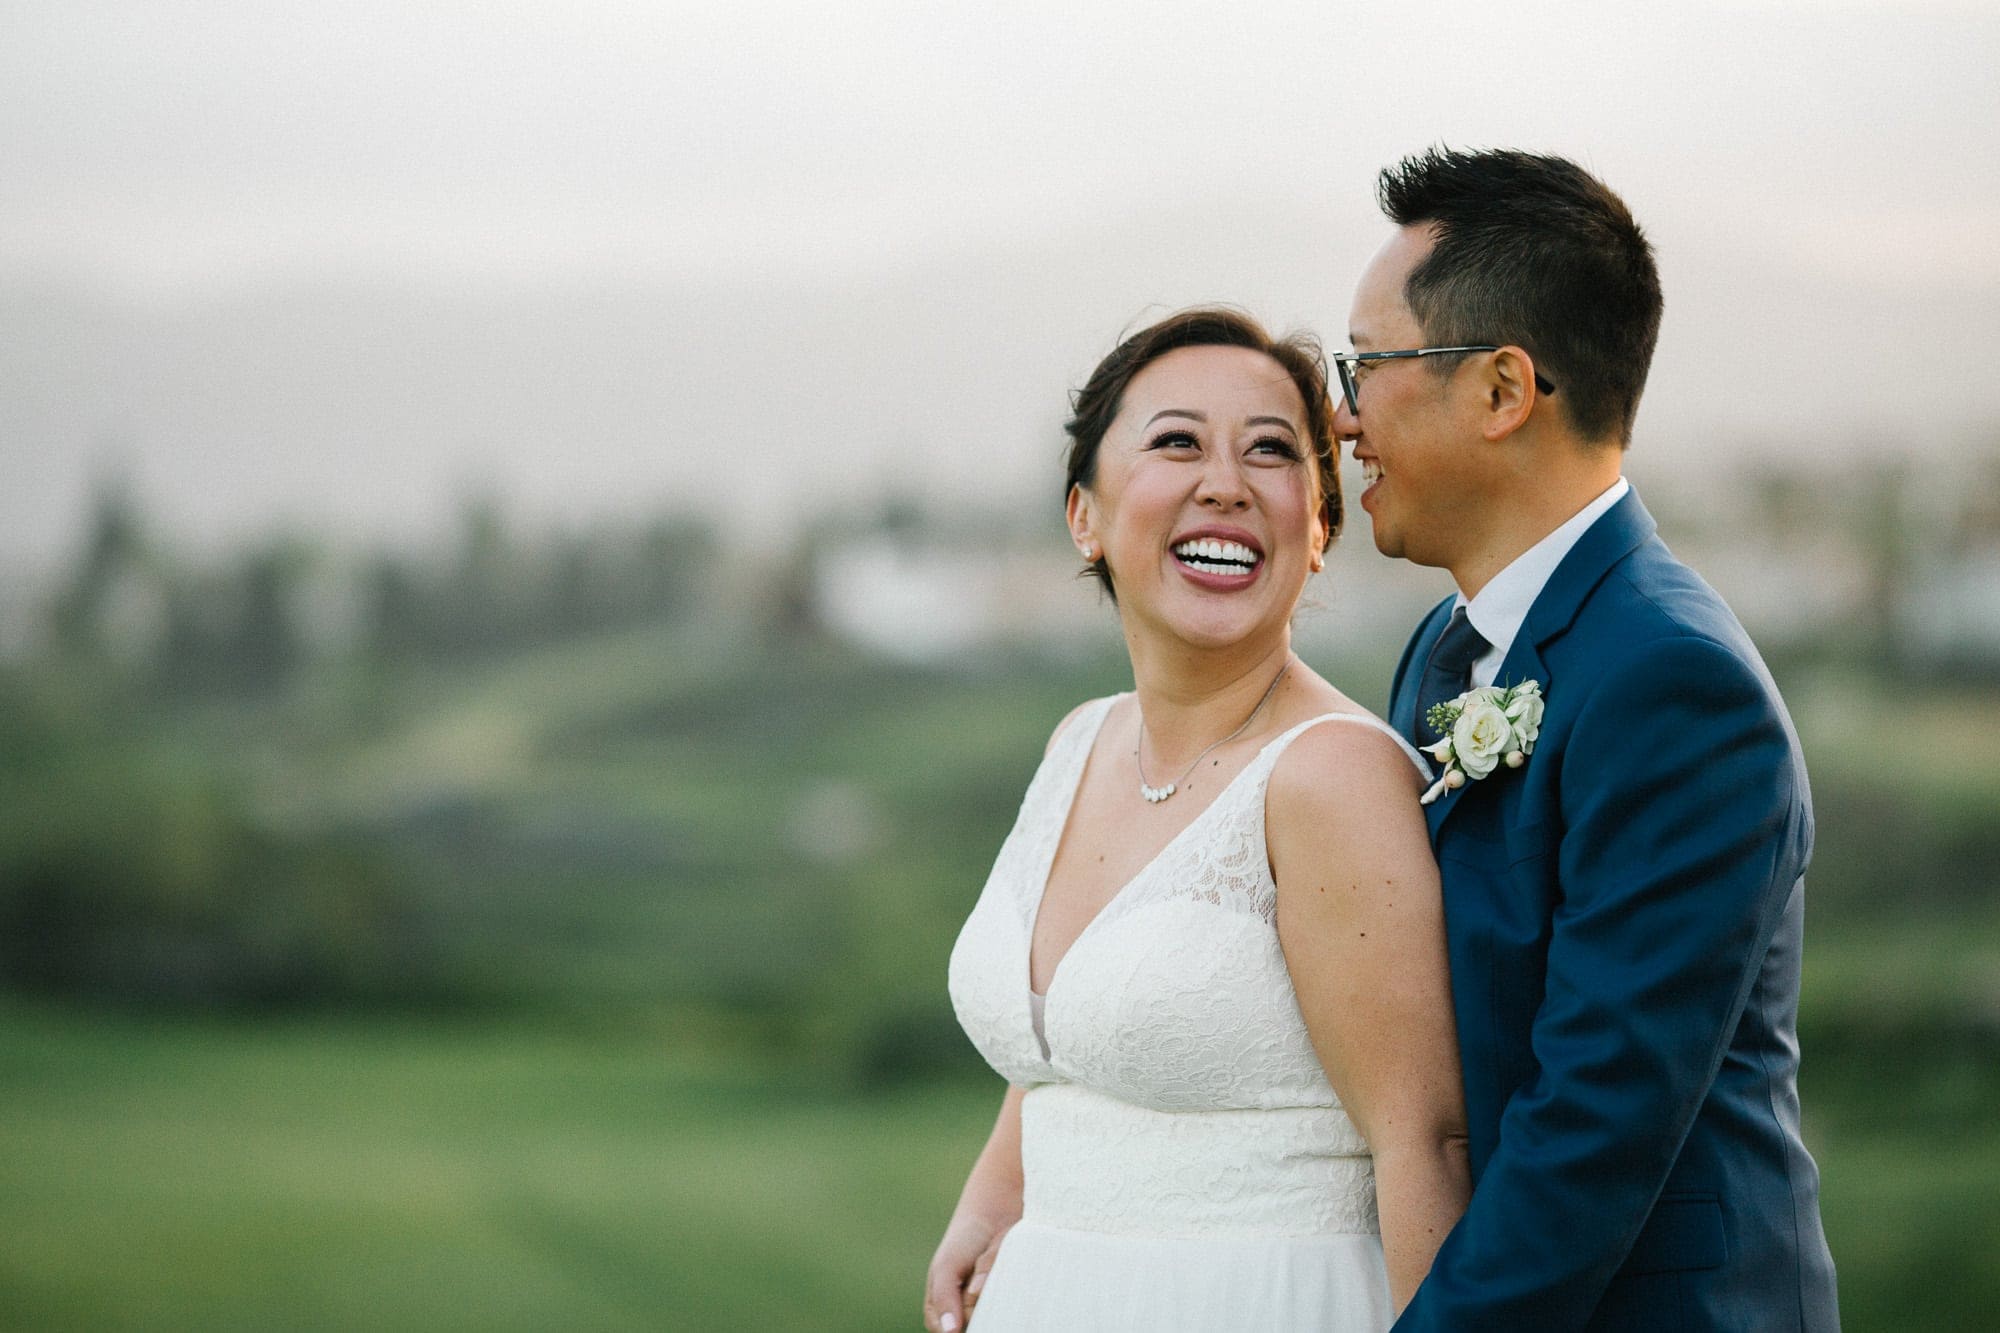 Bride and groom couples photos at sunset overlooking green hills in San Ramon